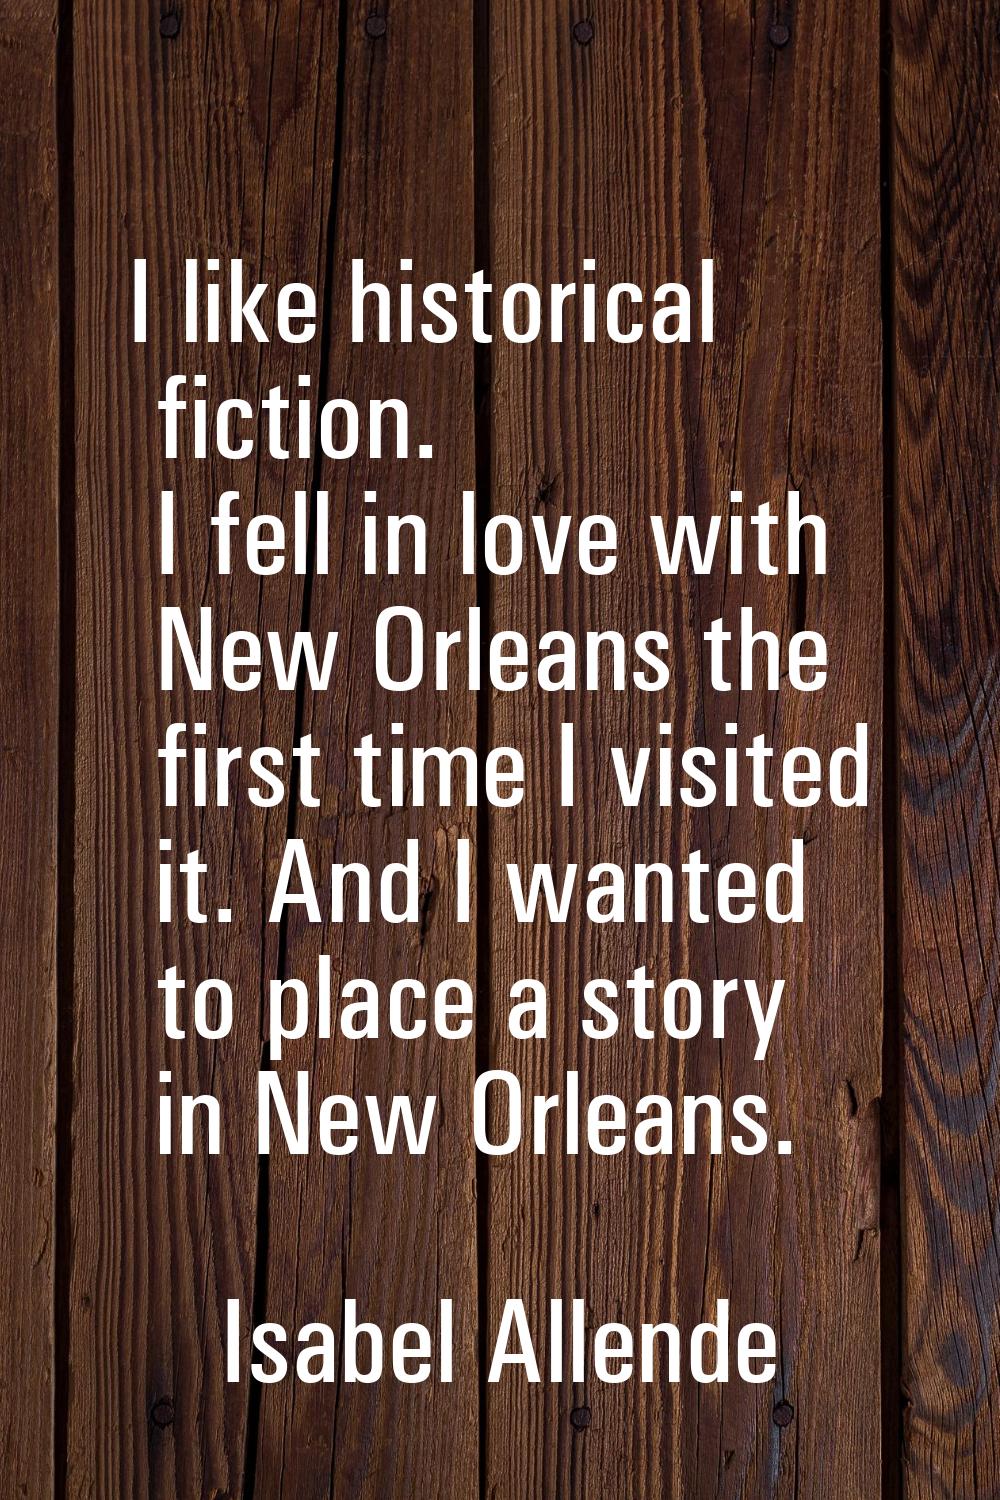 I like historical fiction. I fell in love with New Orleans the first time I visited it. And I wante